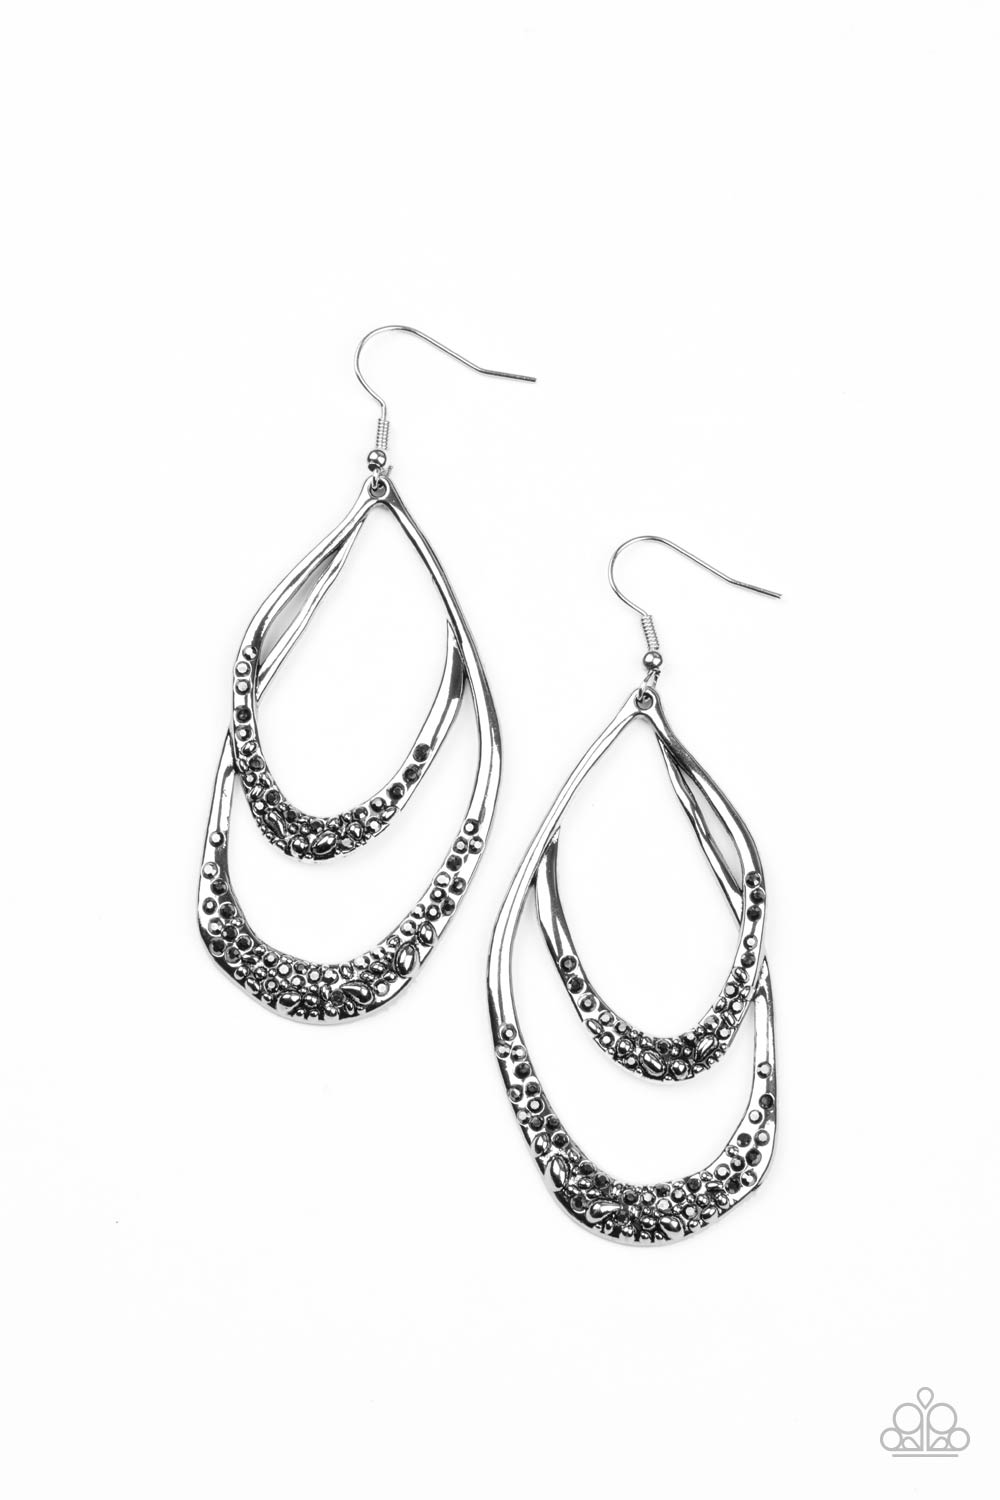 Beyond Your GLEAMS - silver - Paparazzi earrings